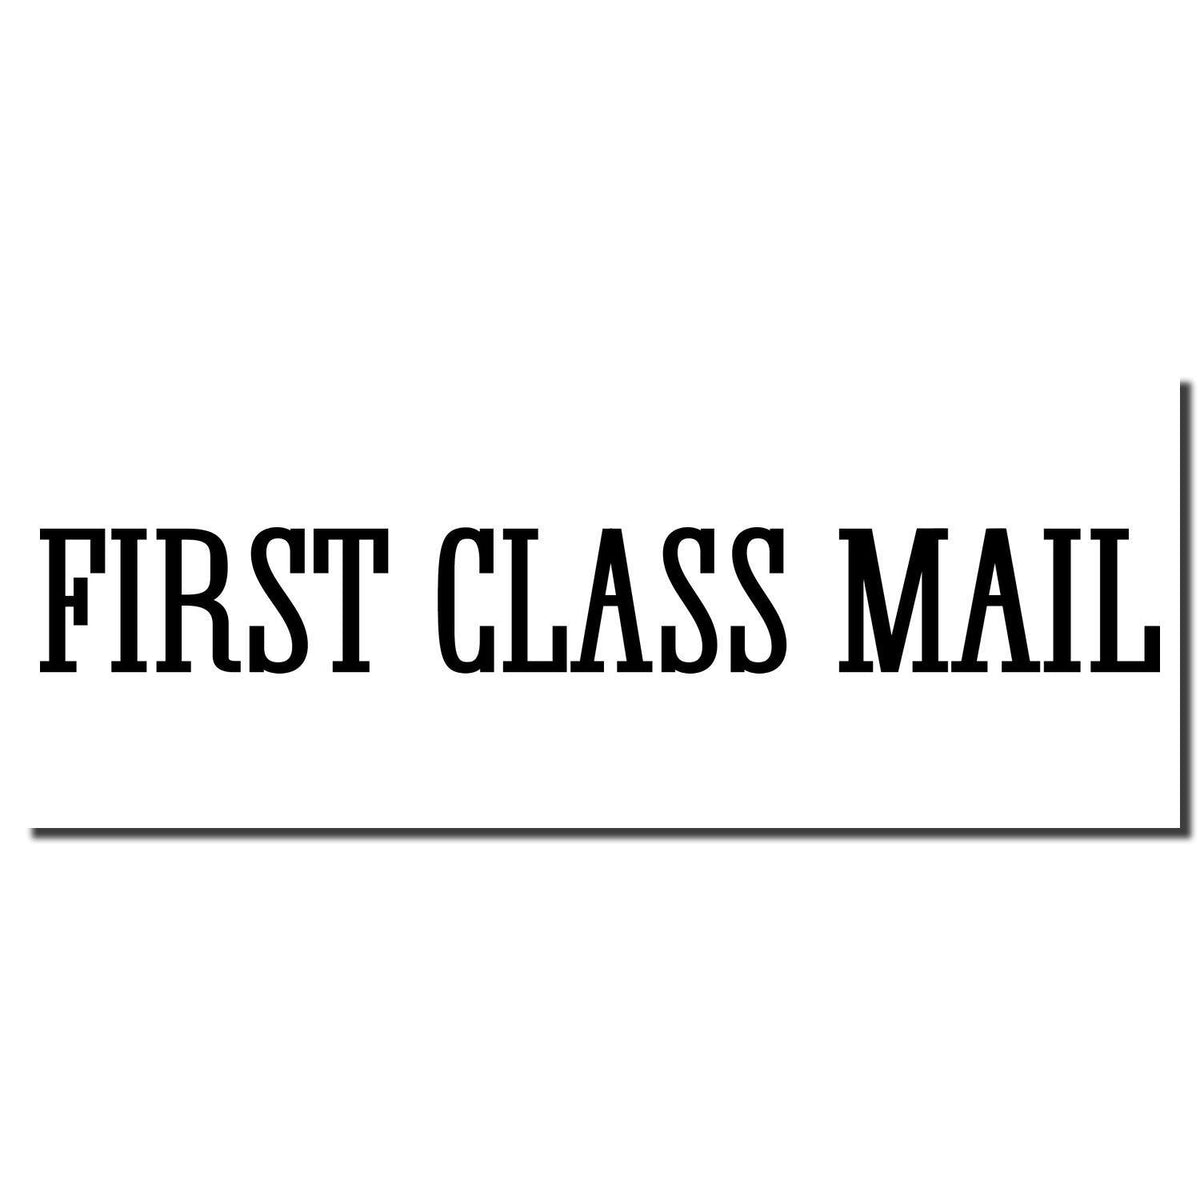 Enlarged Imprint Large Pre-Inked Times First Class Mail Stamp Sample